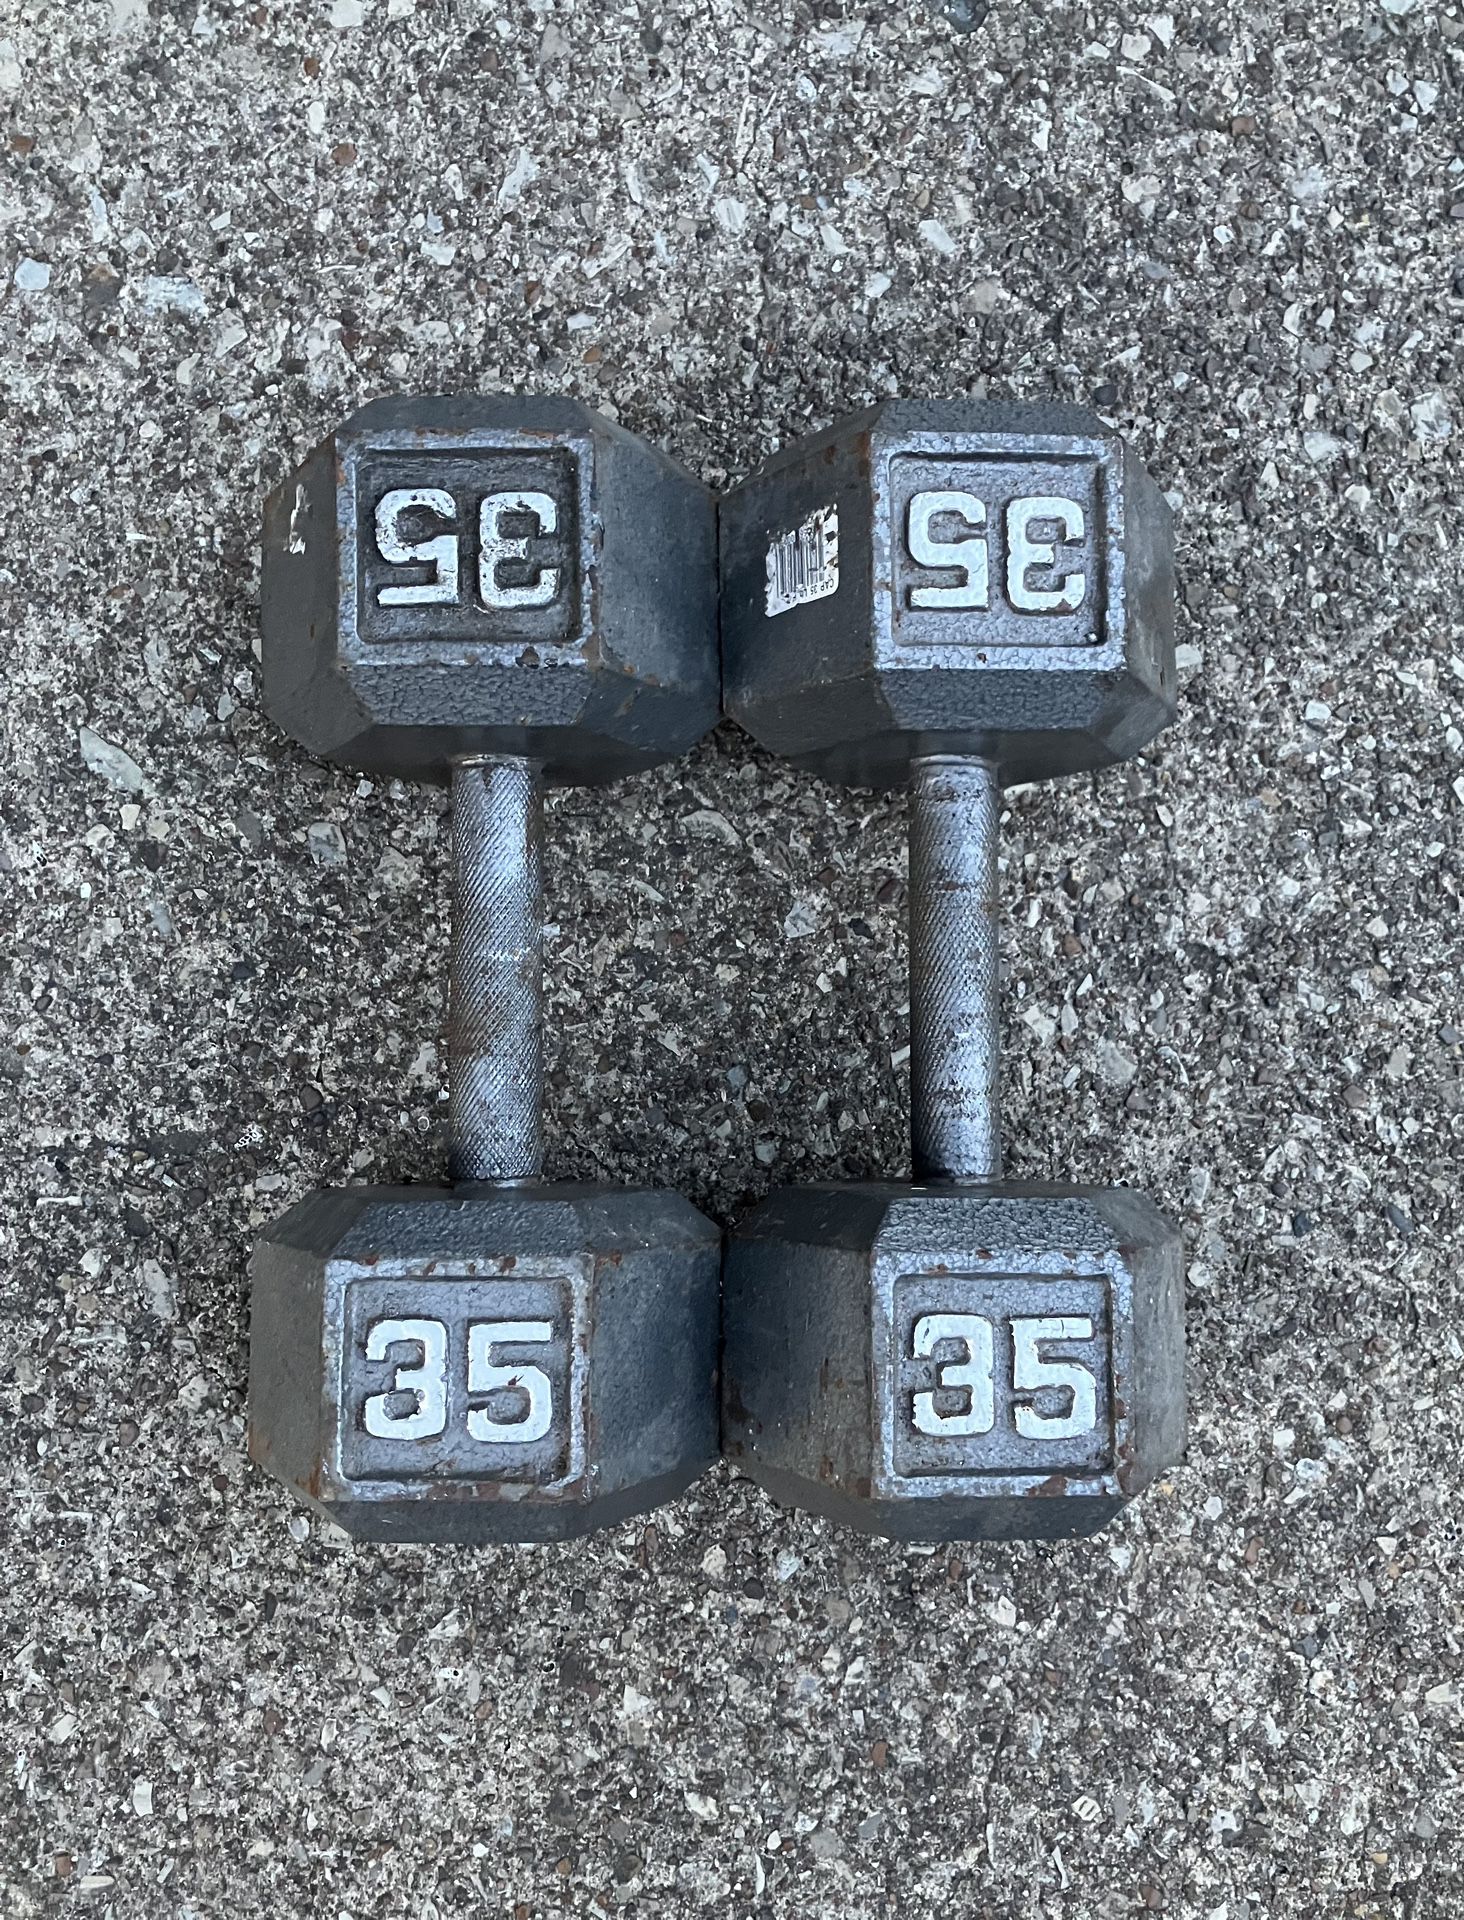 35lb Cast Iron Hex dumbbell set dumbbells 35 lb lbs 35lbs Weight Weights 70lbs total Workout Weightlifting